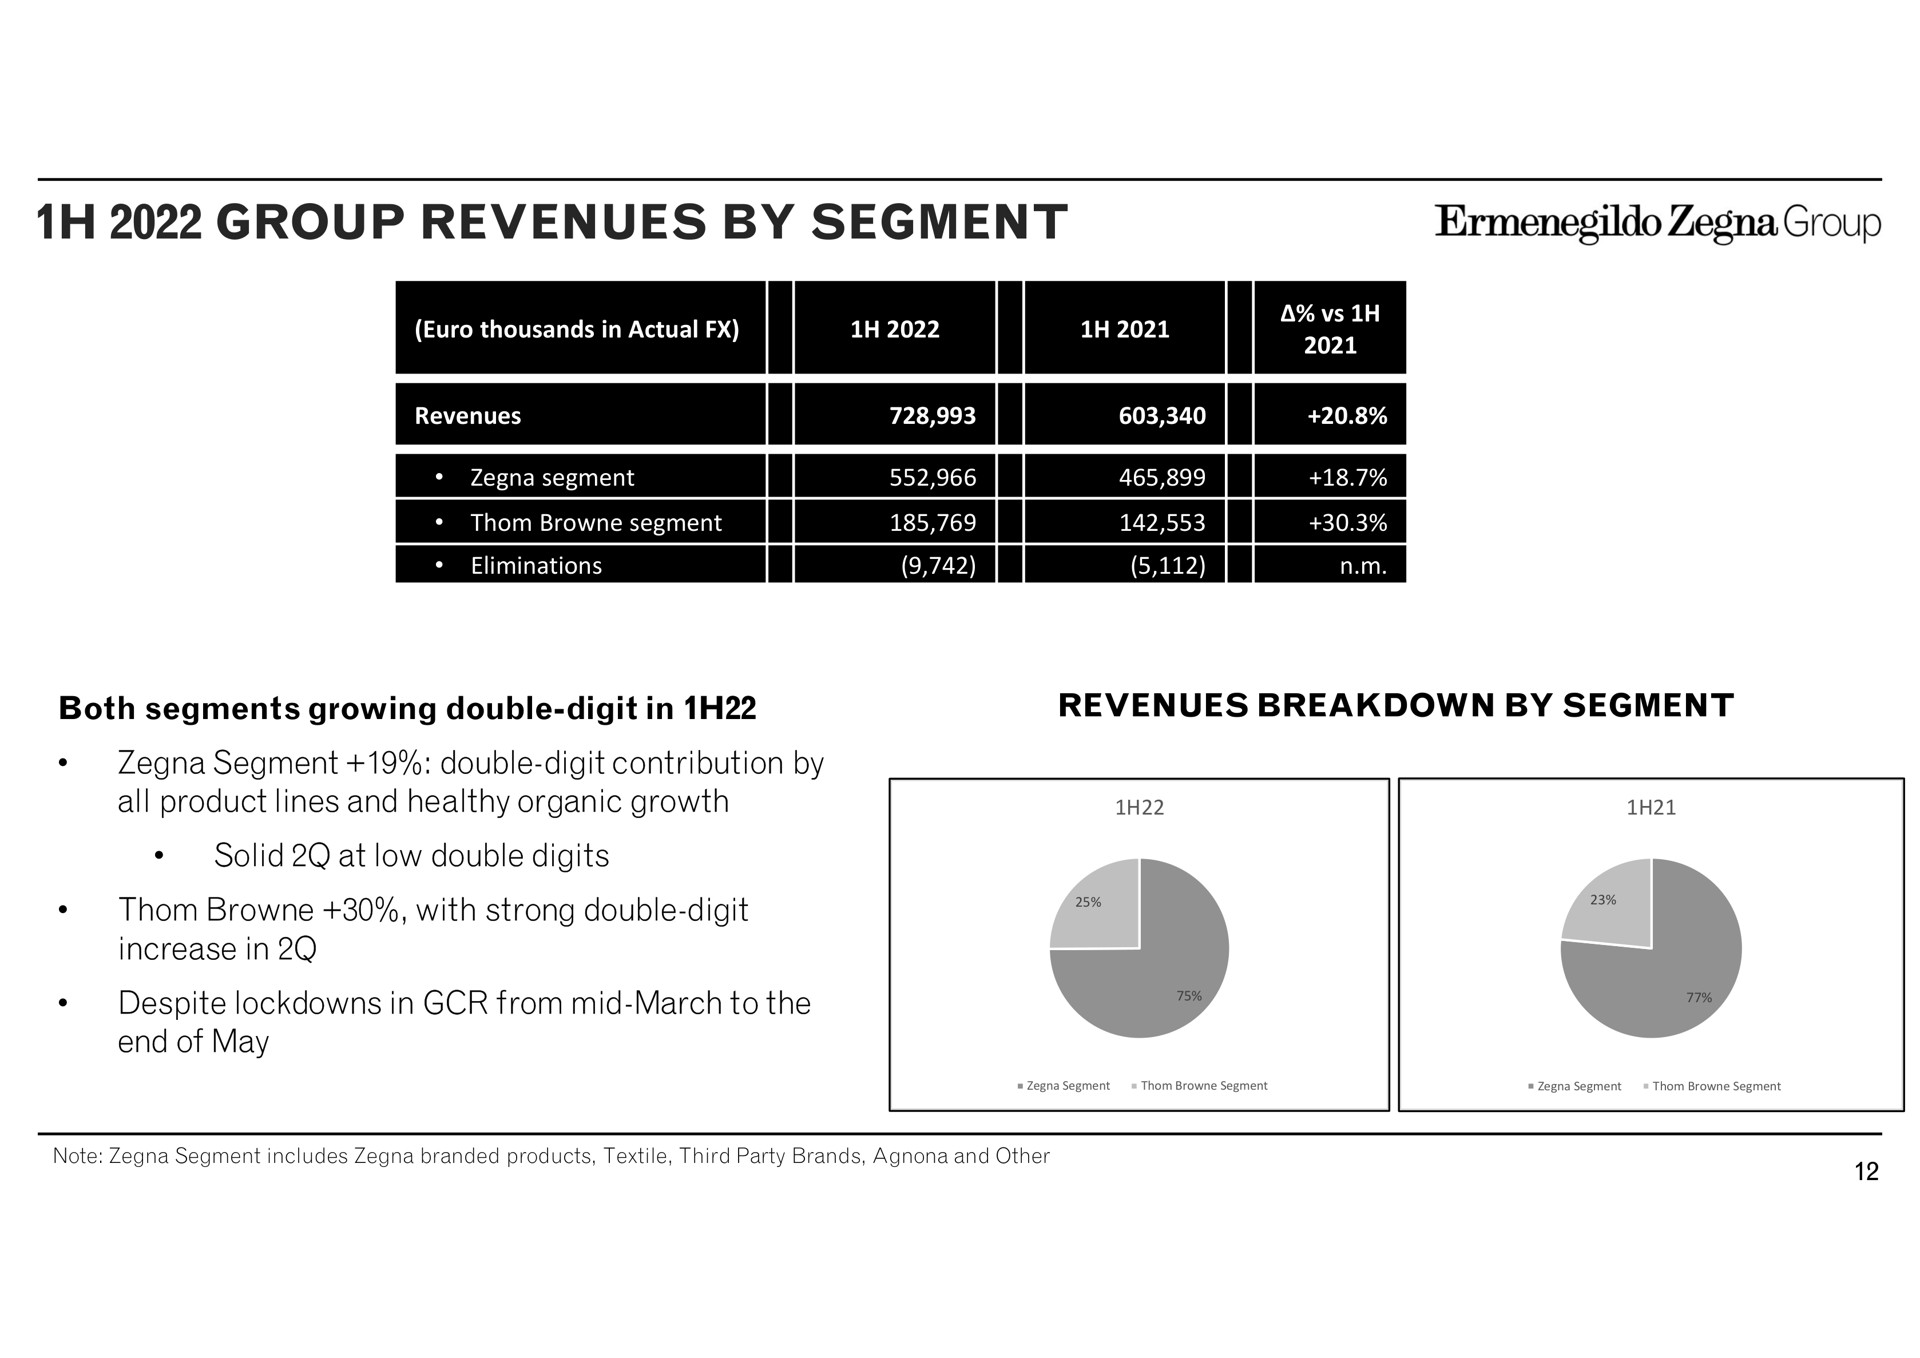 group revenues by segment both segments growing double digit in segment double digit contribution by all product lines and healthy organic growth solid at low double digits with strong double digit increase in despite in from mid march to the end of may thousands actual plies i a a a breakdown note includes branded products textile third party brands other | Zegna